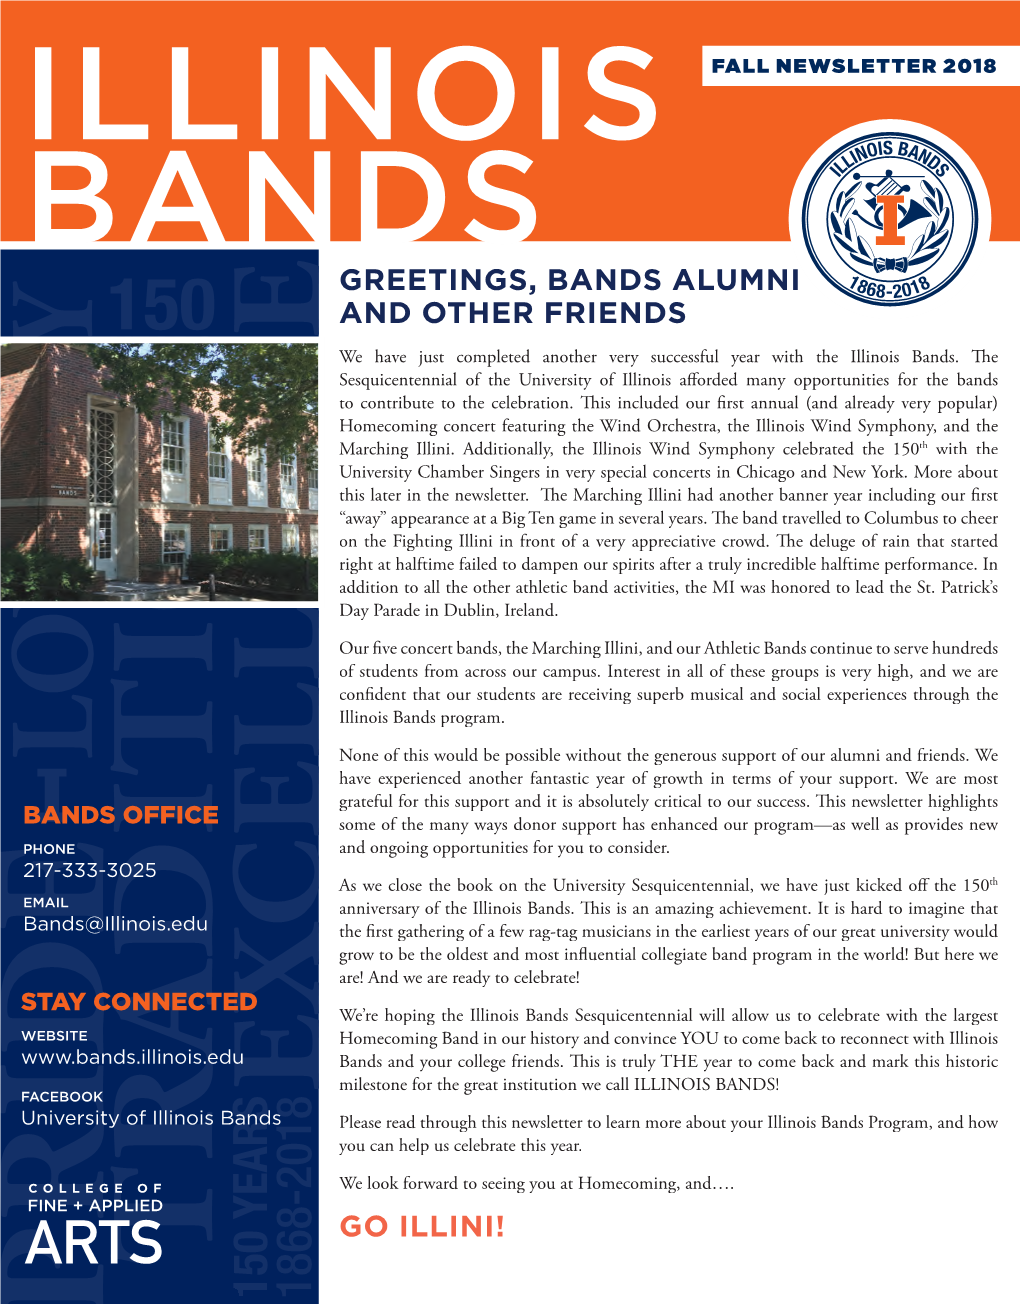 Greetings, Bands Alumni and Other Friends Go Illini!